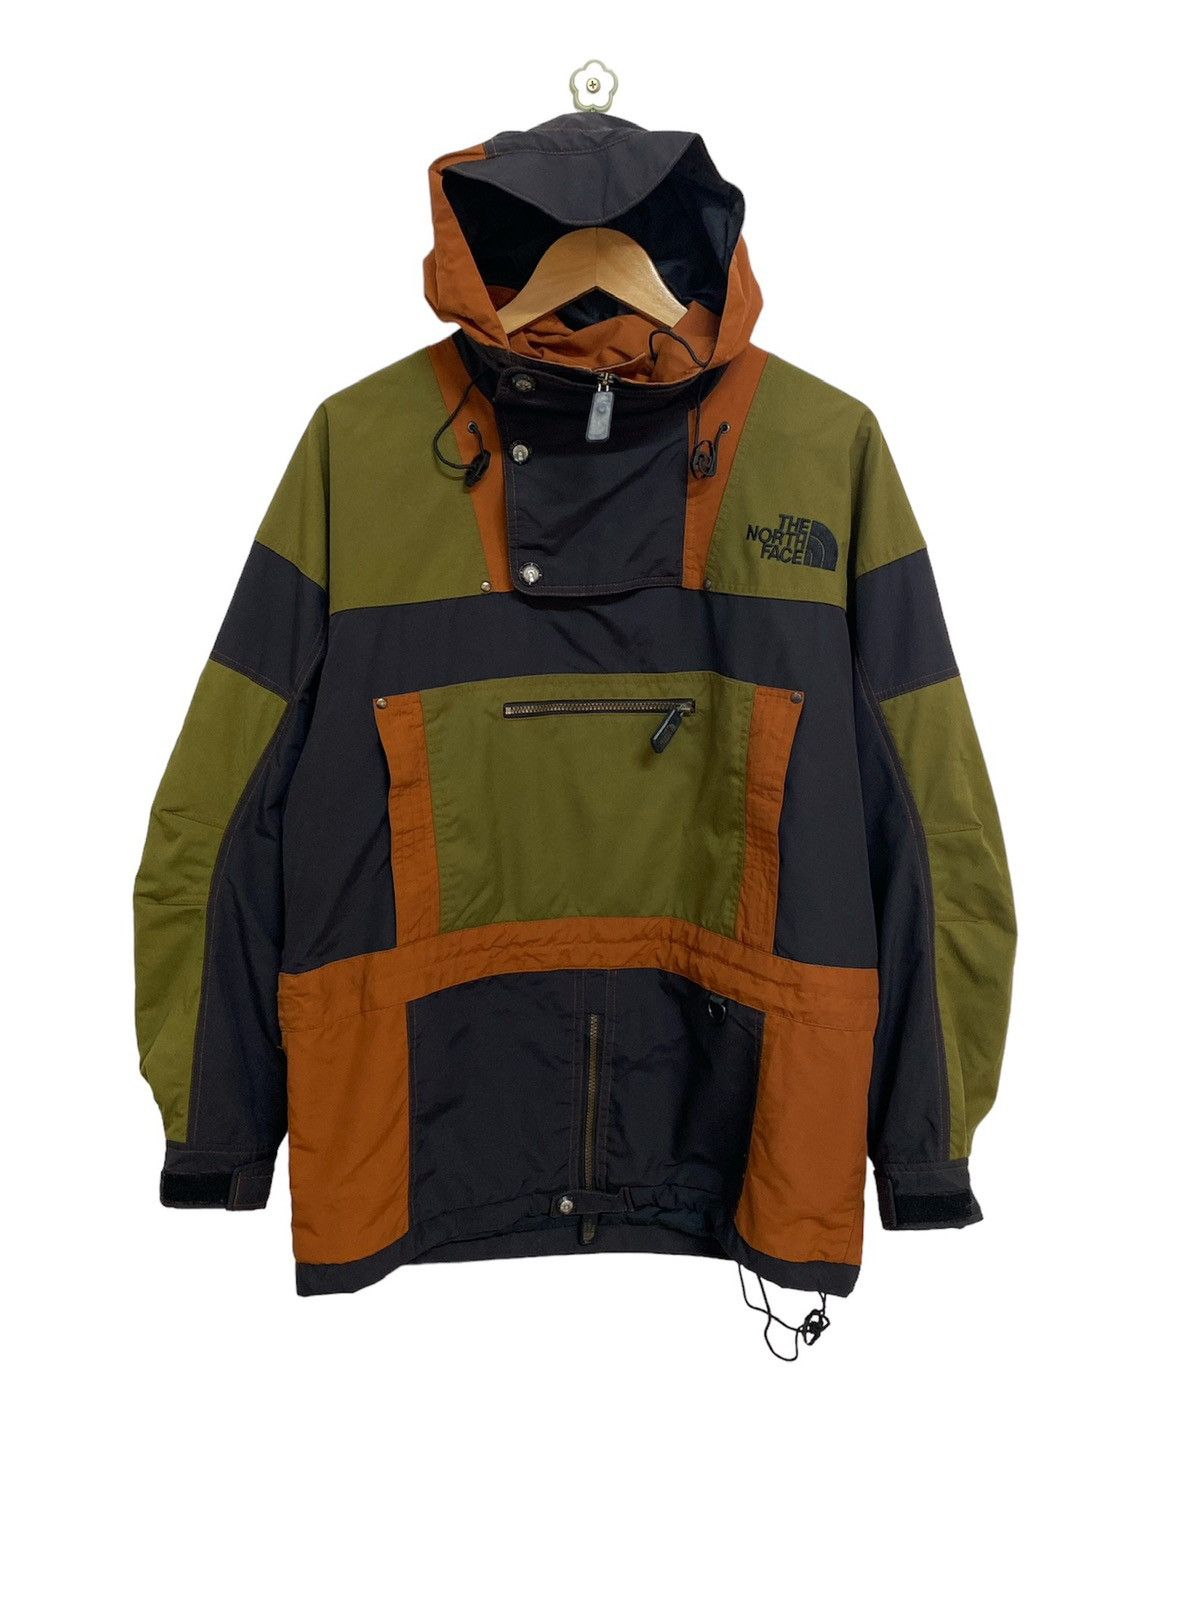 Vintage - 90s The North Face RAGE Ultrex Expedition Colorblock Jacket - 2